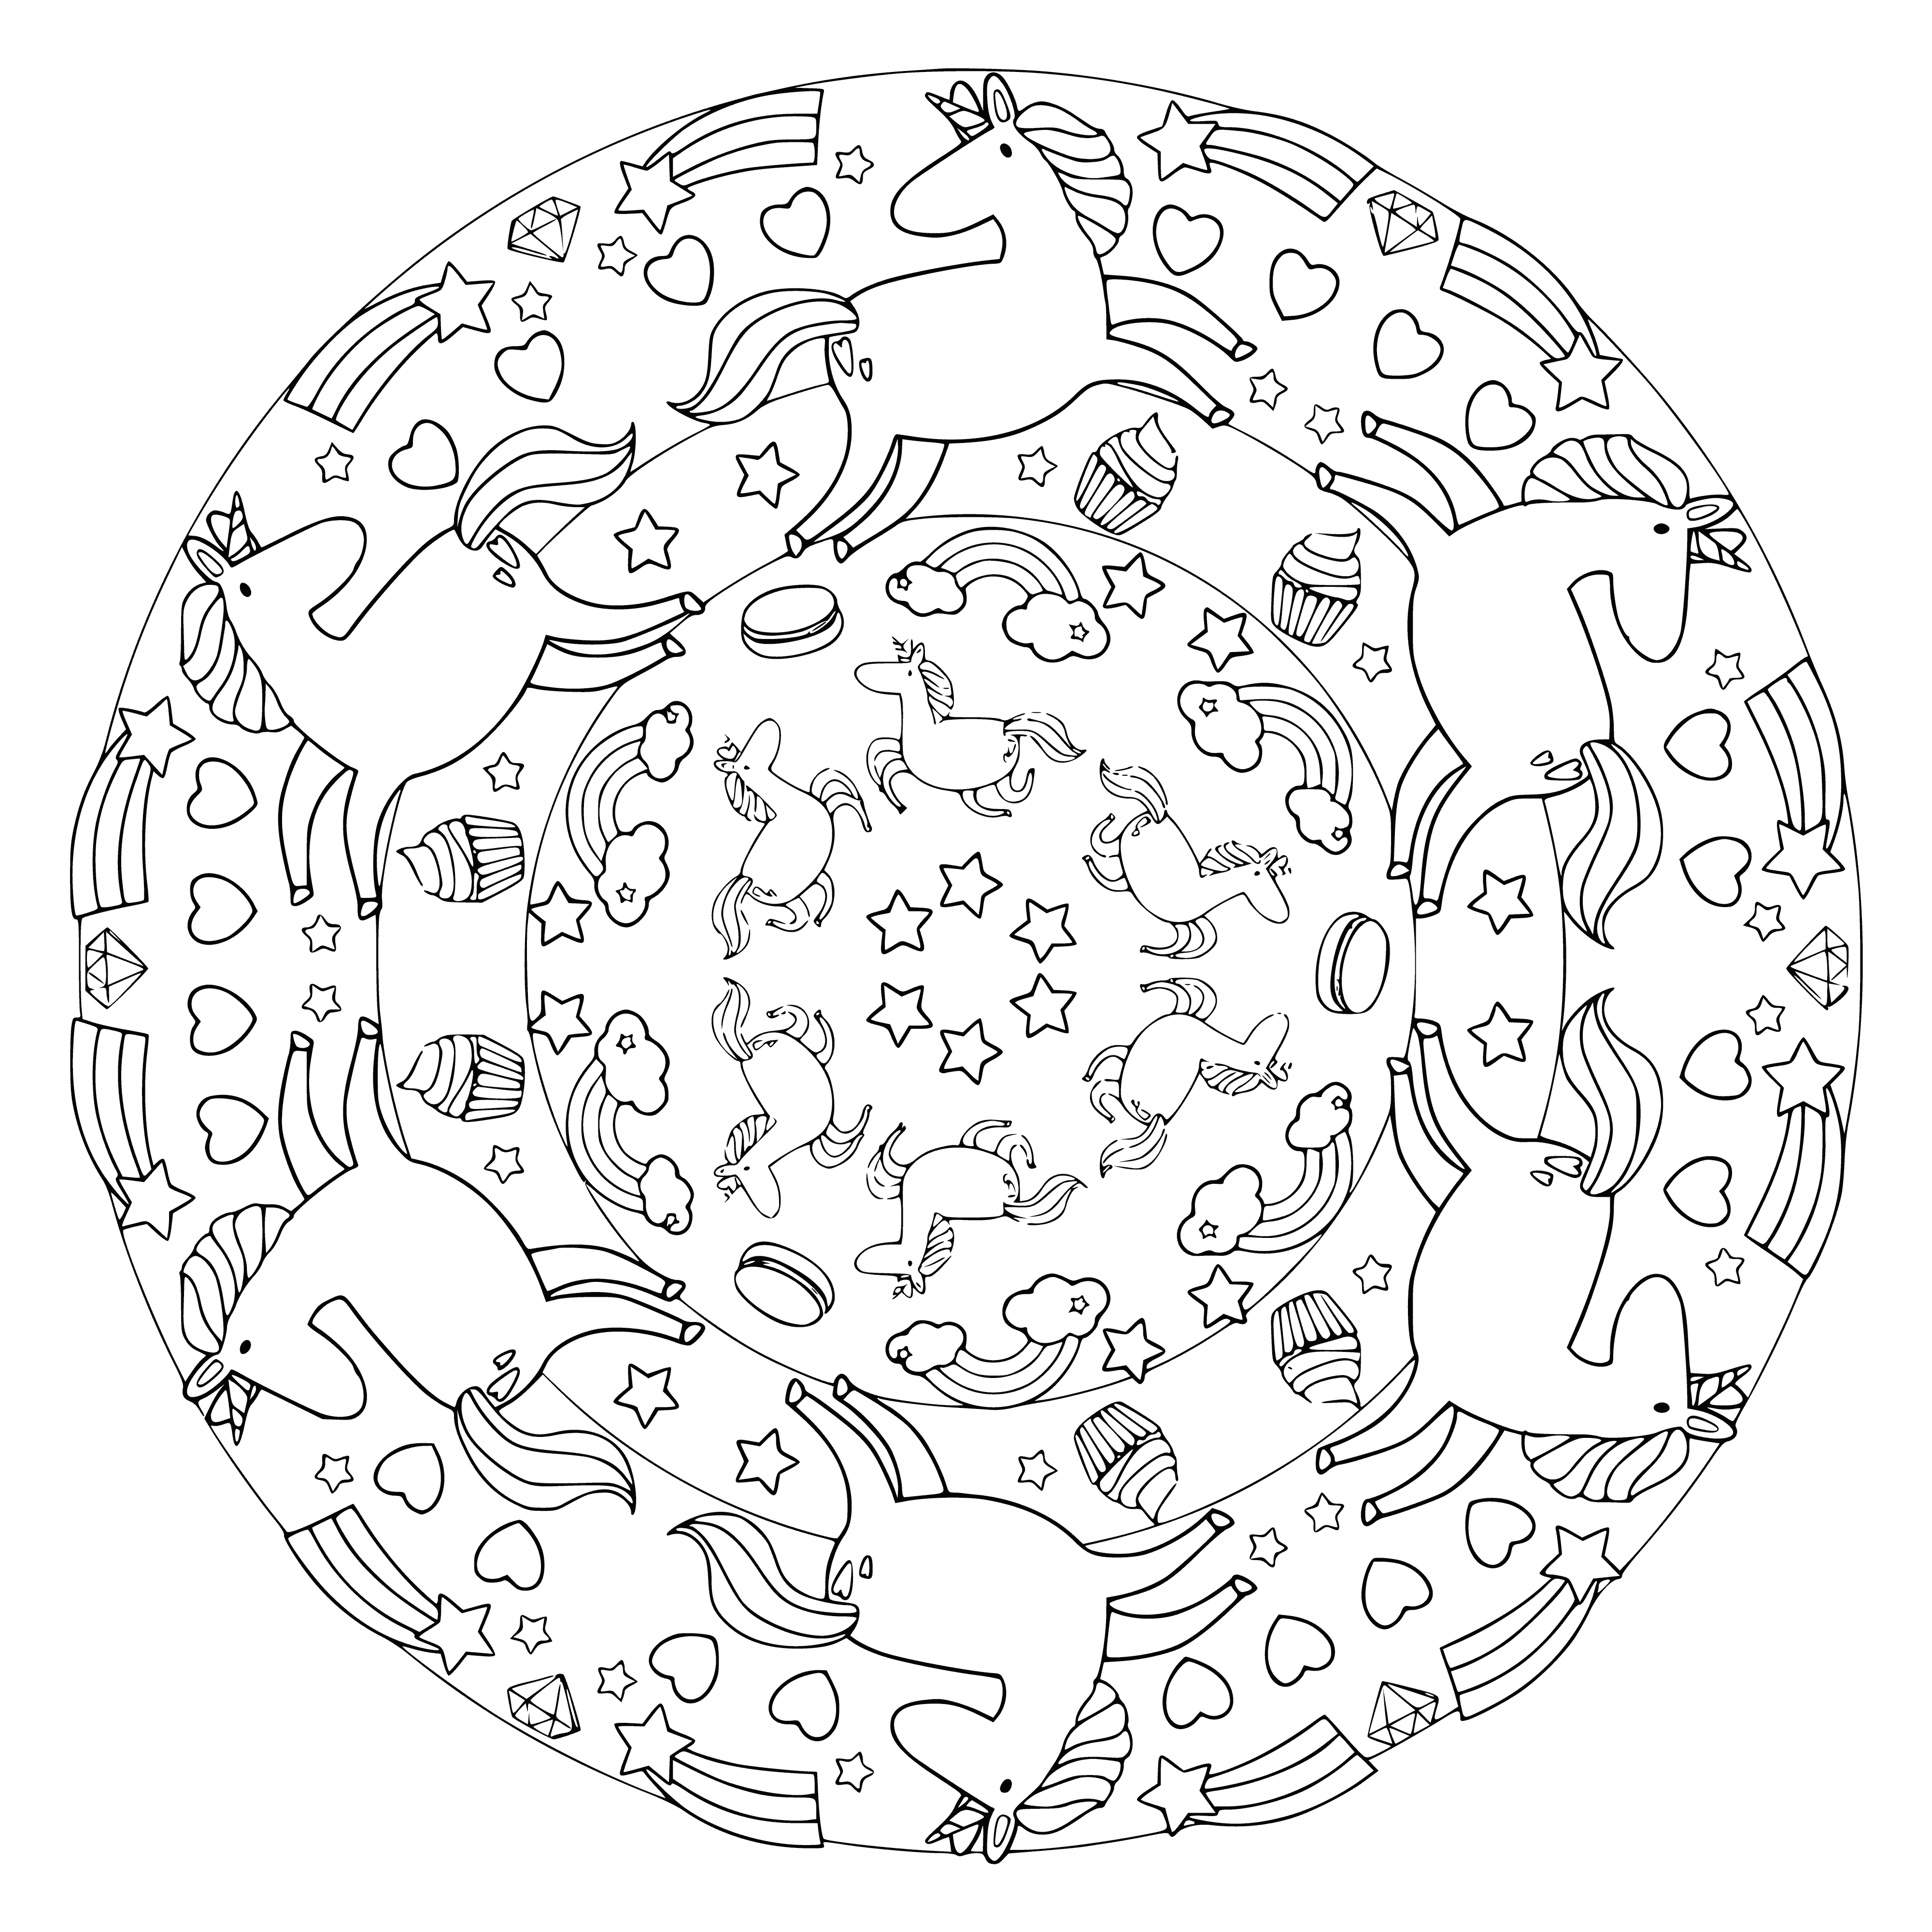 coloring page: A large, circular mandala filled with intricate patterns and designs, plus small animals and flowers. #UnicornMandala